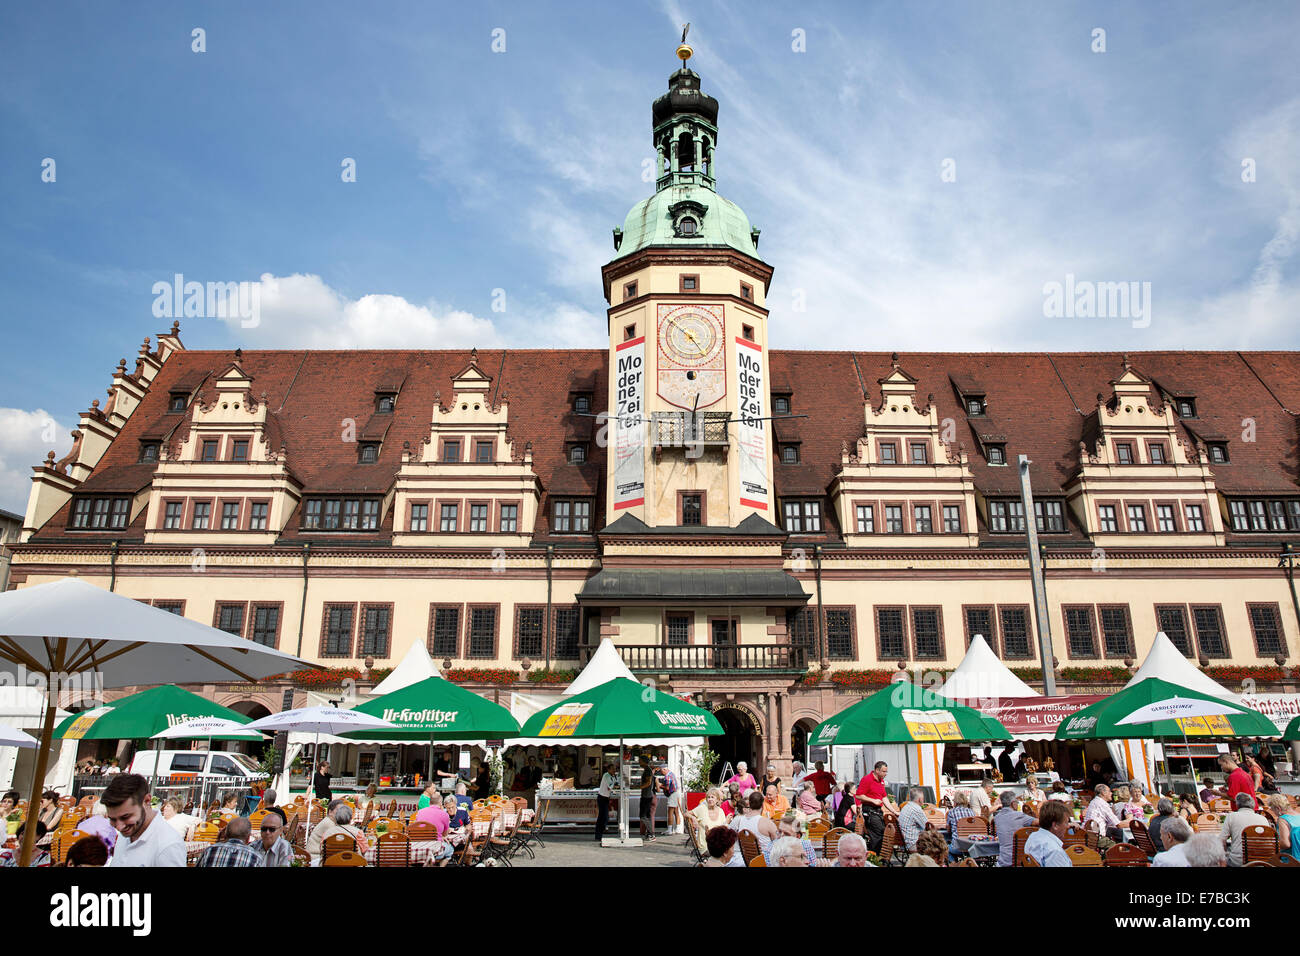 Market Square in Leipzig, Germany. The old town hall and clock tower. Stock Photo